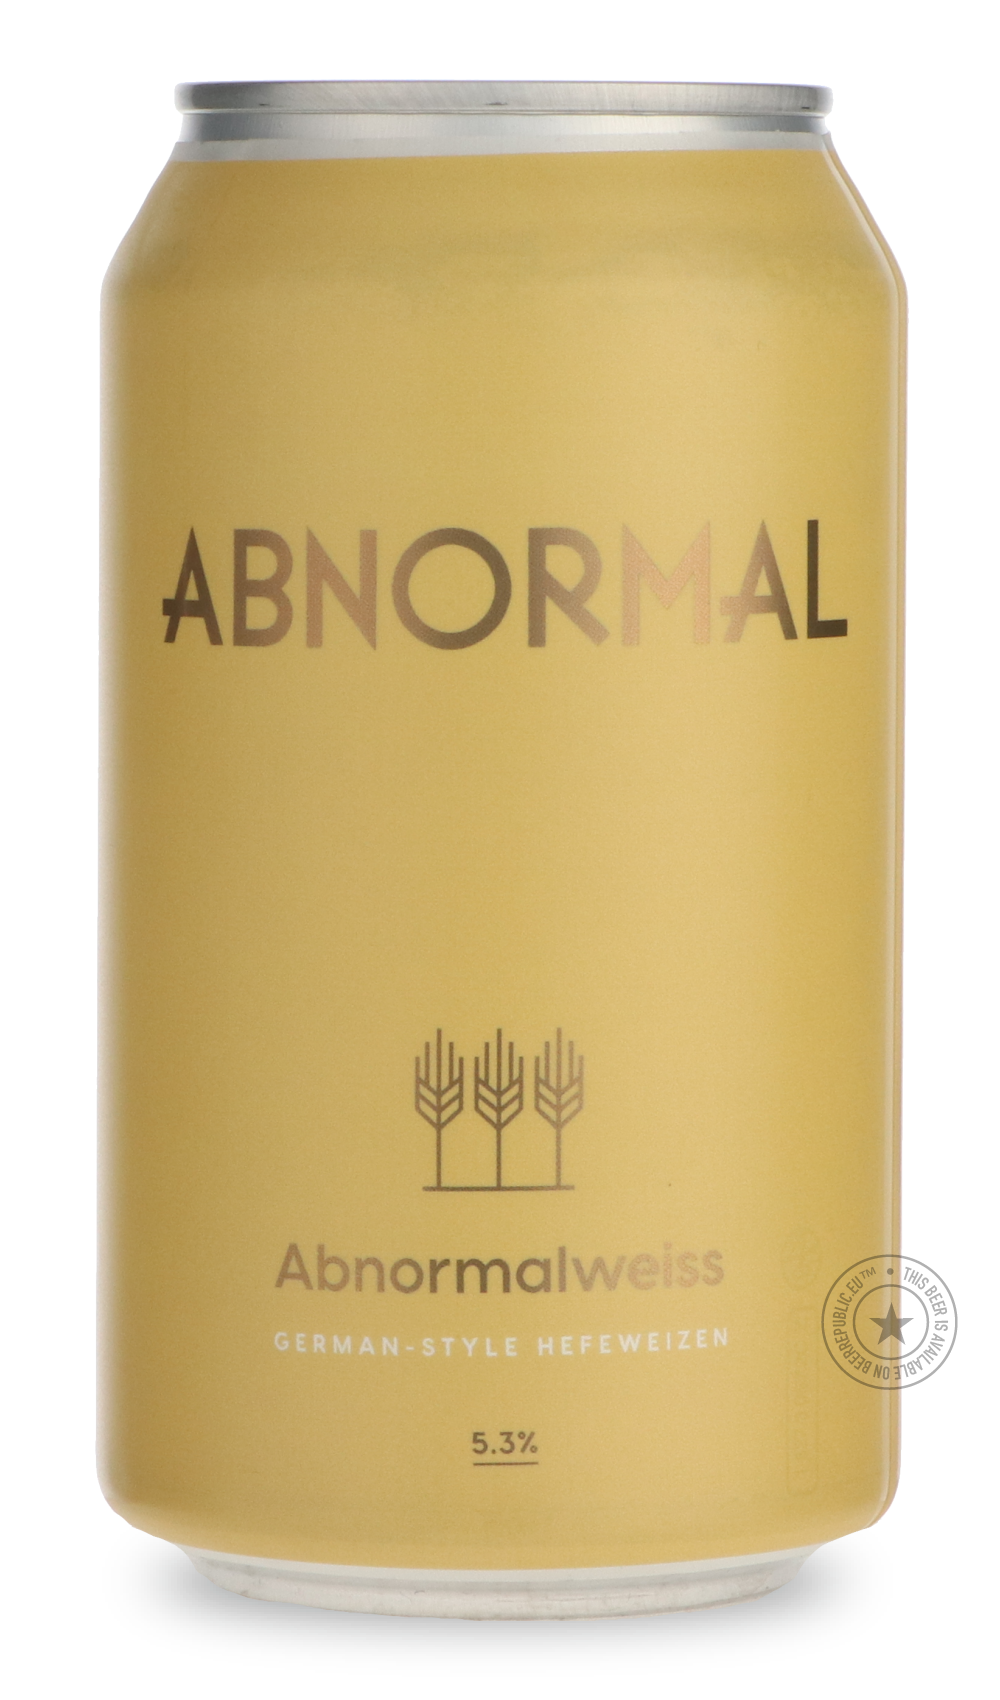 -Abnormal- Abnormalweiss-Pale- Only @ Beer Republic - The best online beer store for American & Canadian craft beer - Buy beer online from the USA and Canada - Bier online kopen - Amerikaans bier kopen - Craft beer store - Craft beer kopen - Amerikanisch bier kaufen - Bier online kaufen - Acheter biere online - IPA - Stout - Porter - New England IPA - Hazy IPA - Imperial Stout - Barrel Aged - Barrel Aged Imperial Stout - Brown - Dark beer - Blond - Blonde - Pilsner - Lager - Wheat - Weizen - Amber - Barley 